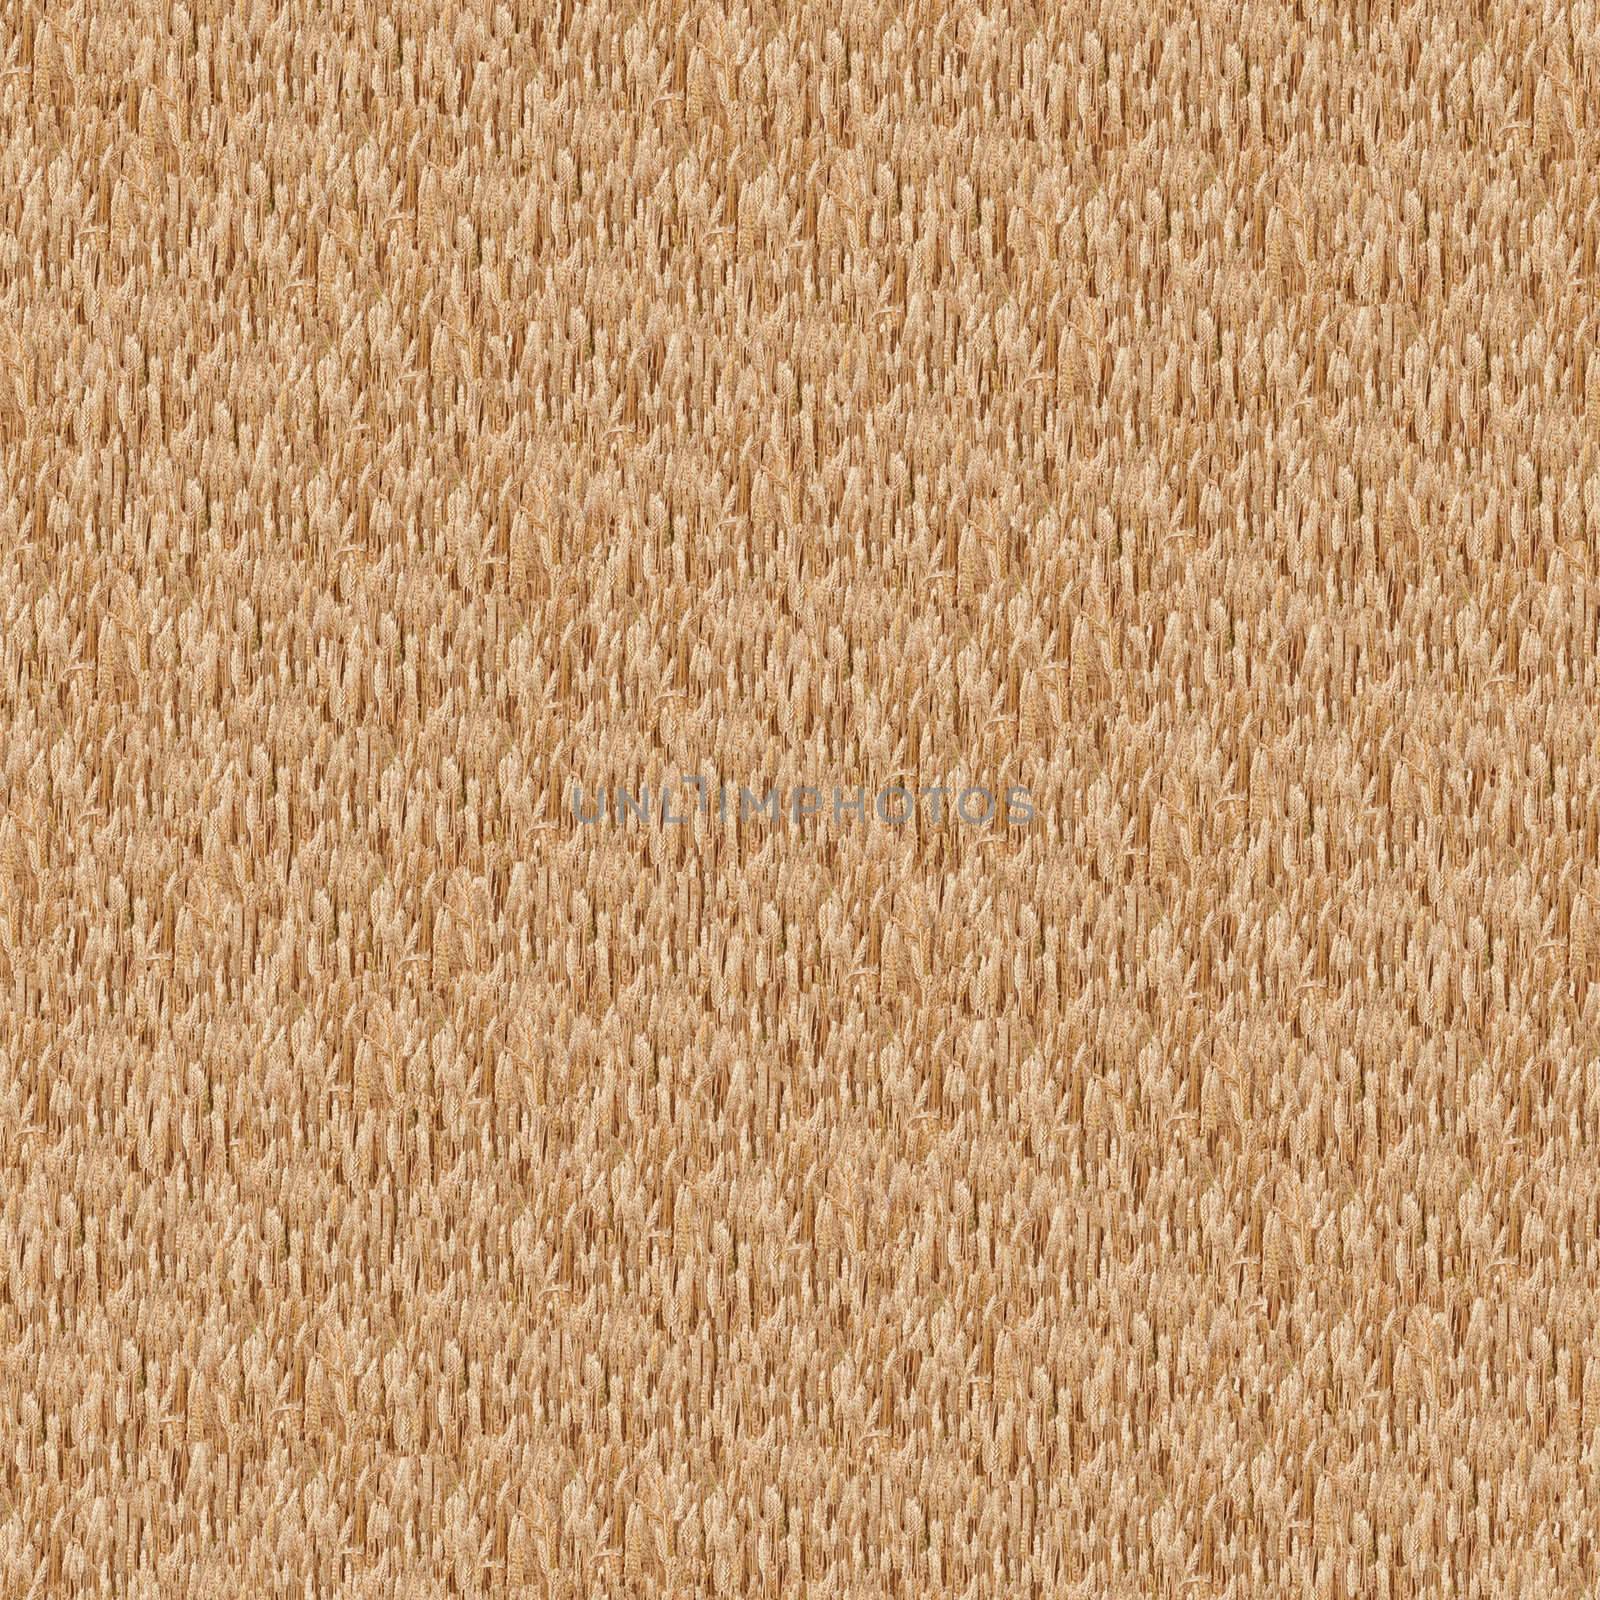 Seamless pattern made of wheat. It's composable like tiles without visible connecting line between parts